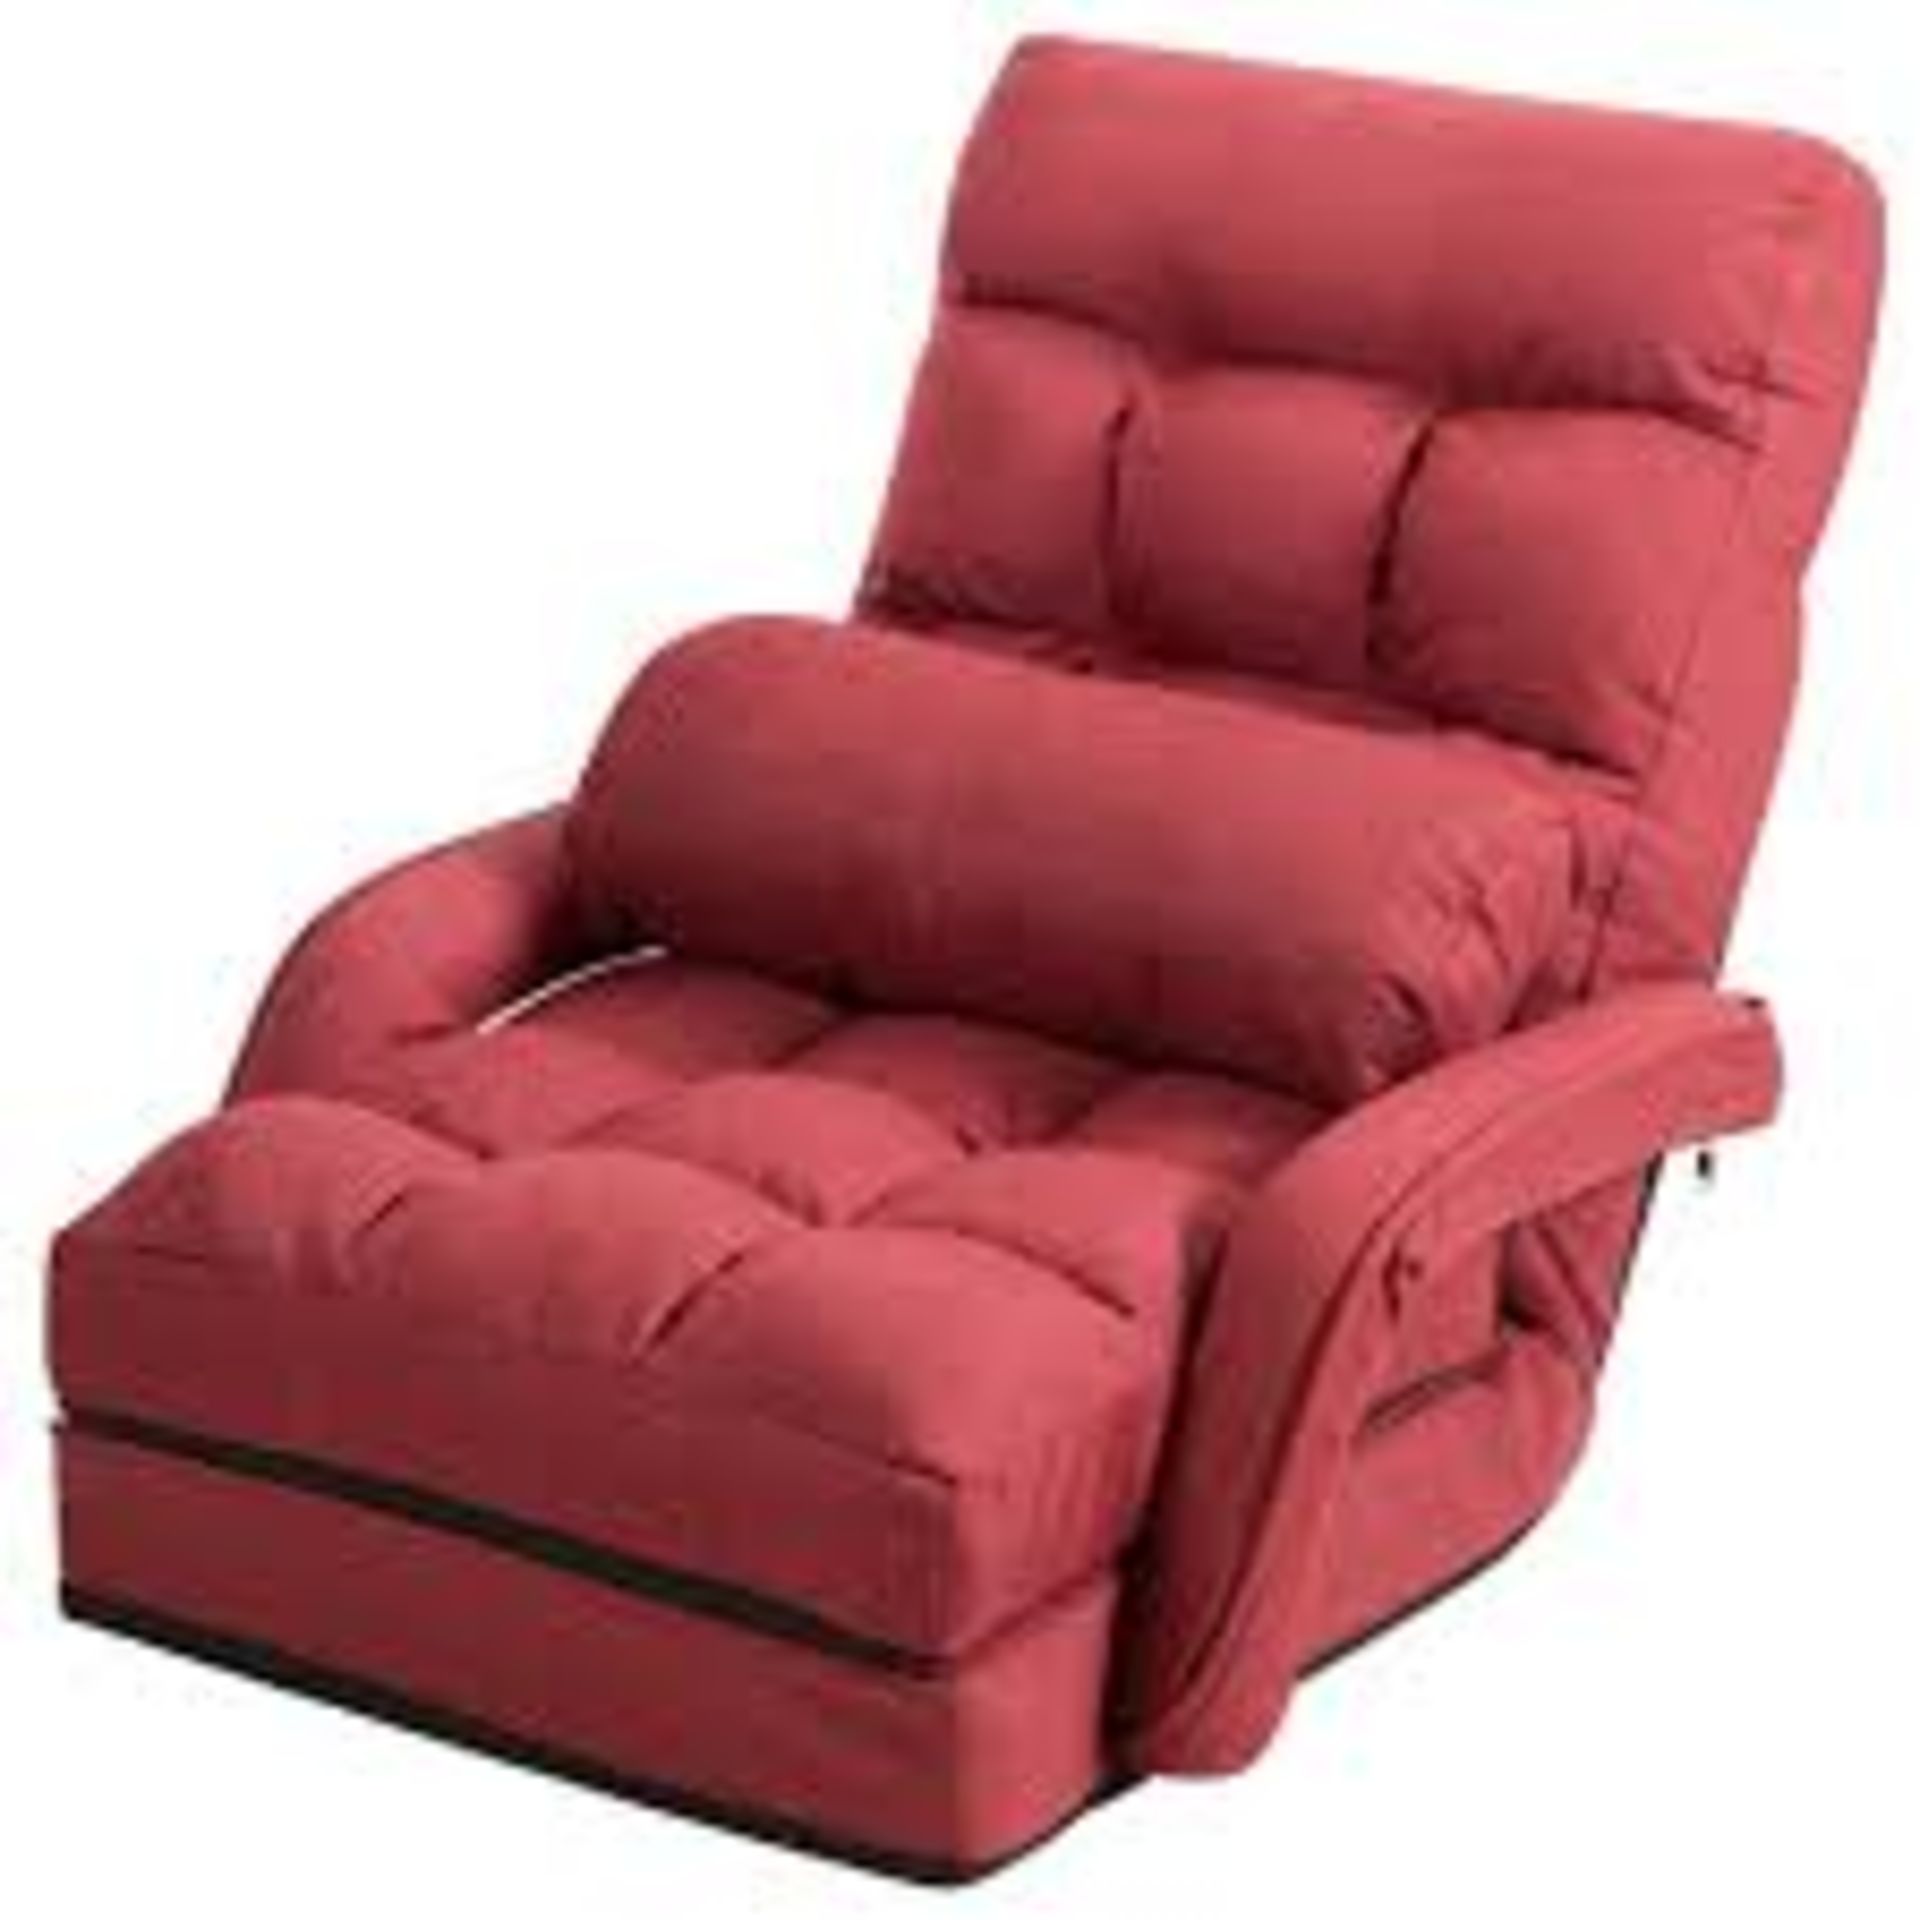 Folding Lazy Floor Chair Sofa with Armrests and Pillow. - R14.6.